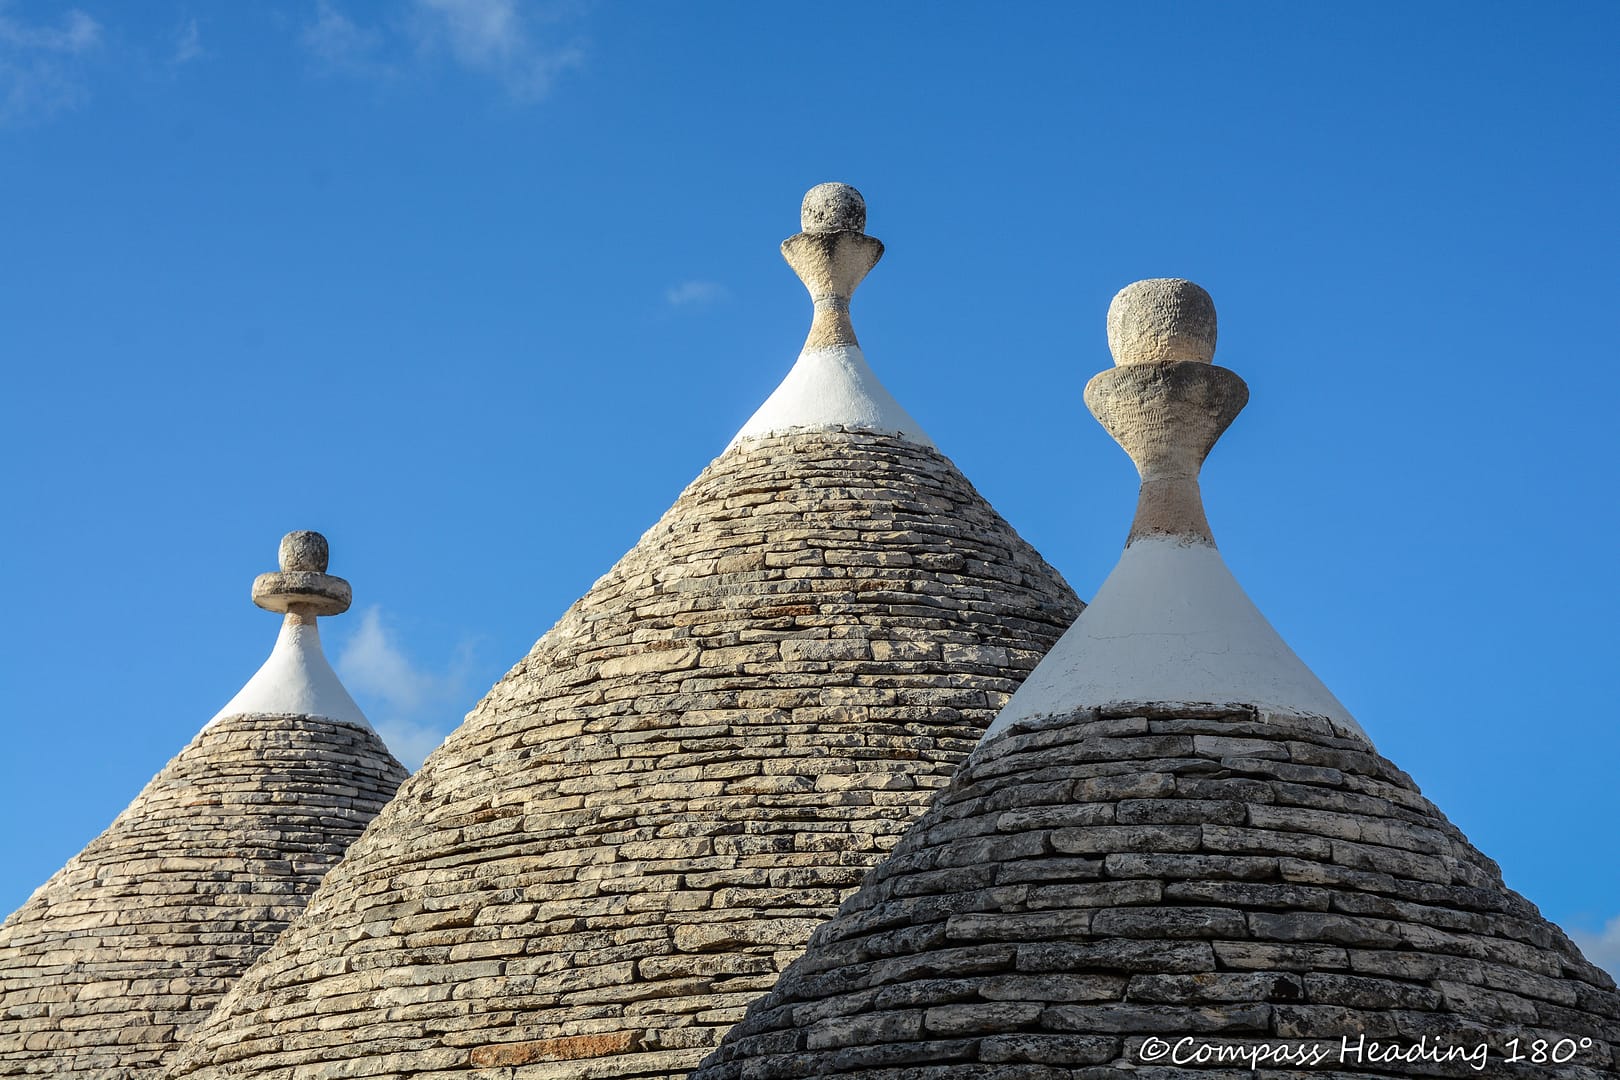 Coned trulli housetops with decorations